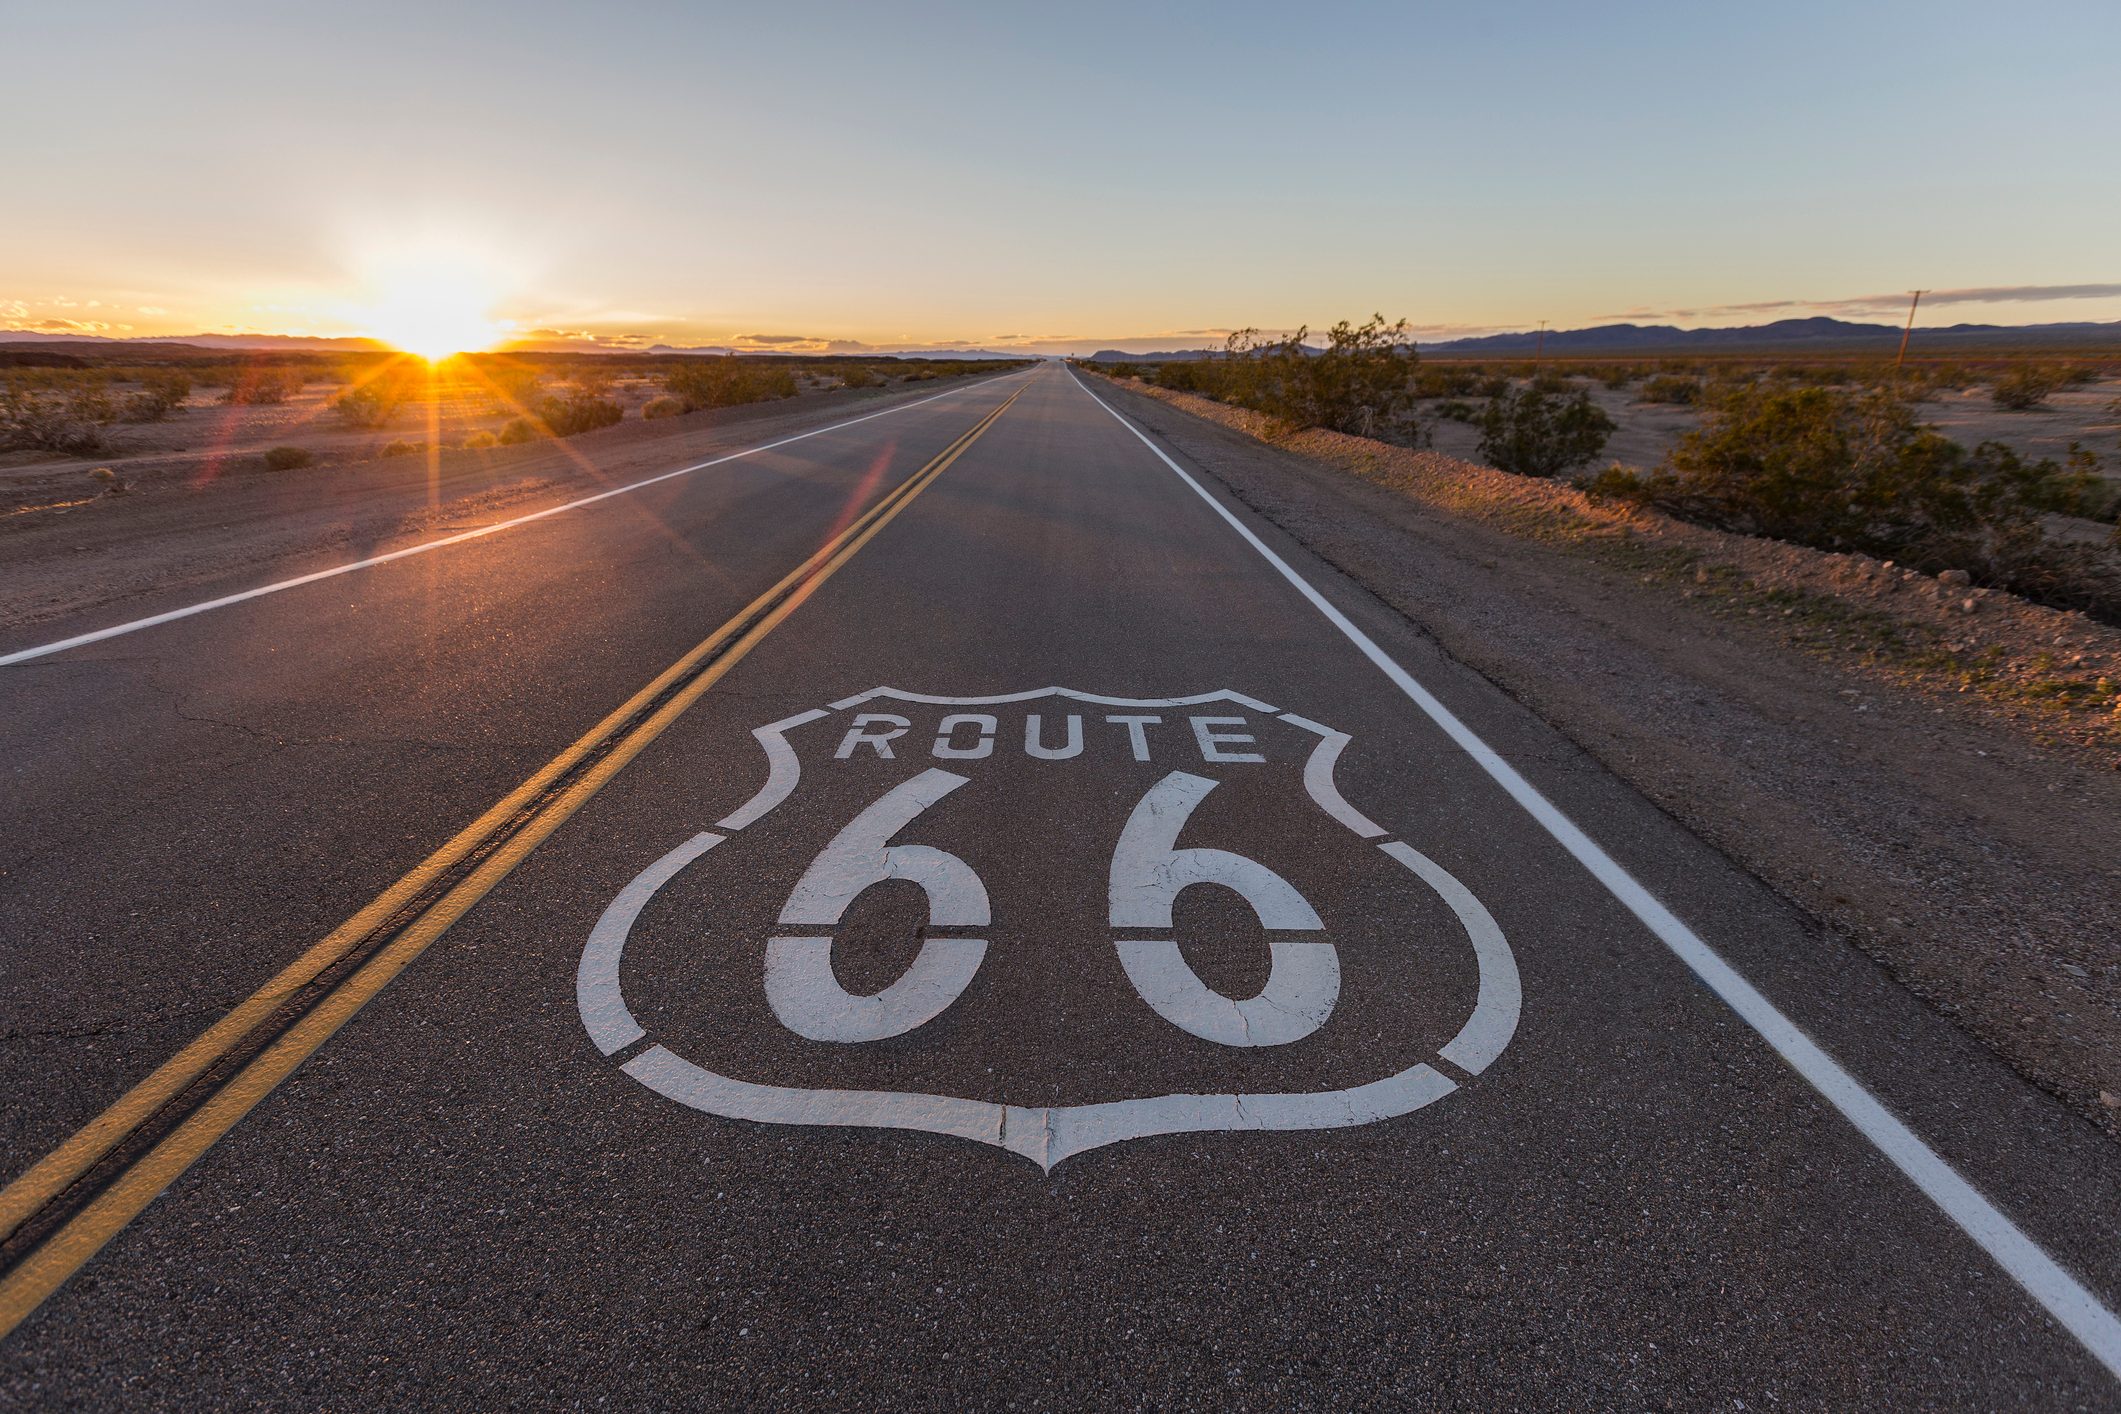 Sunset on Route 66